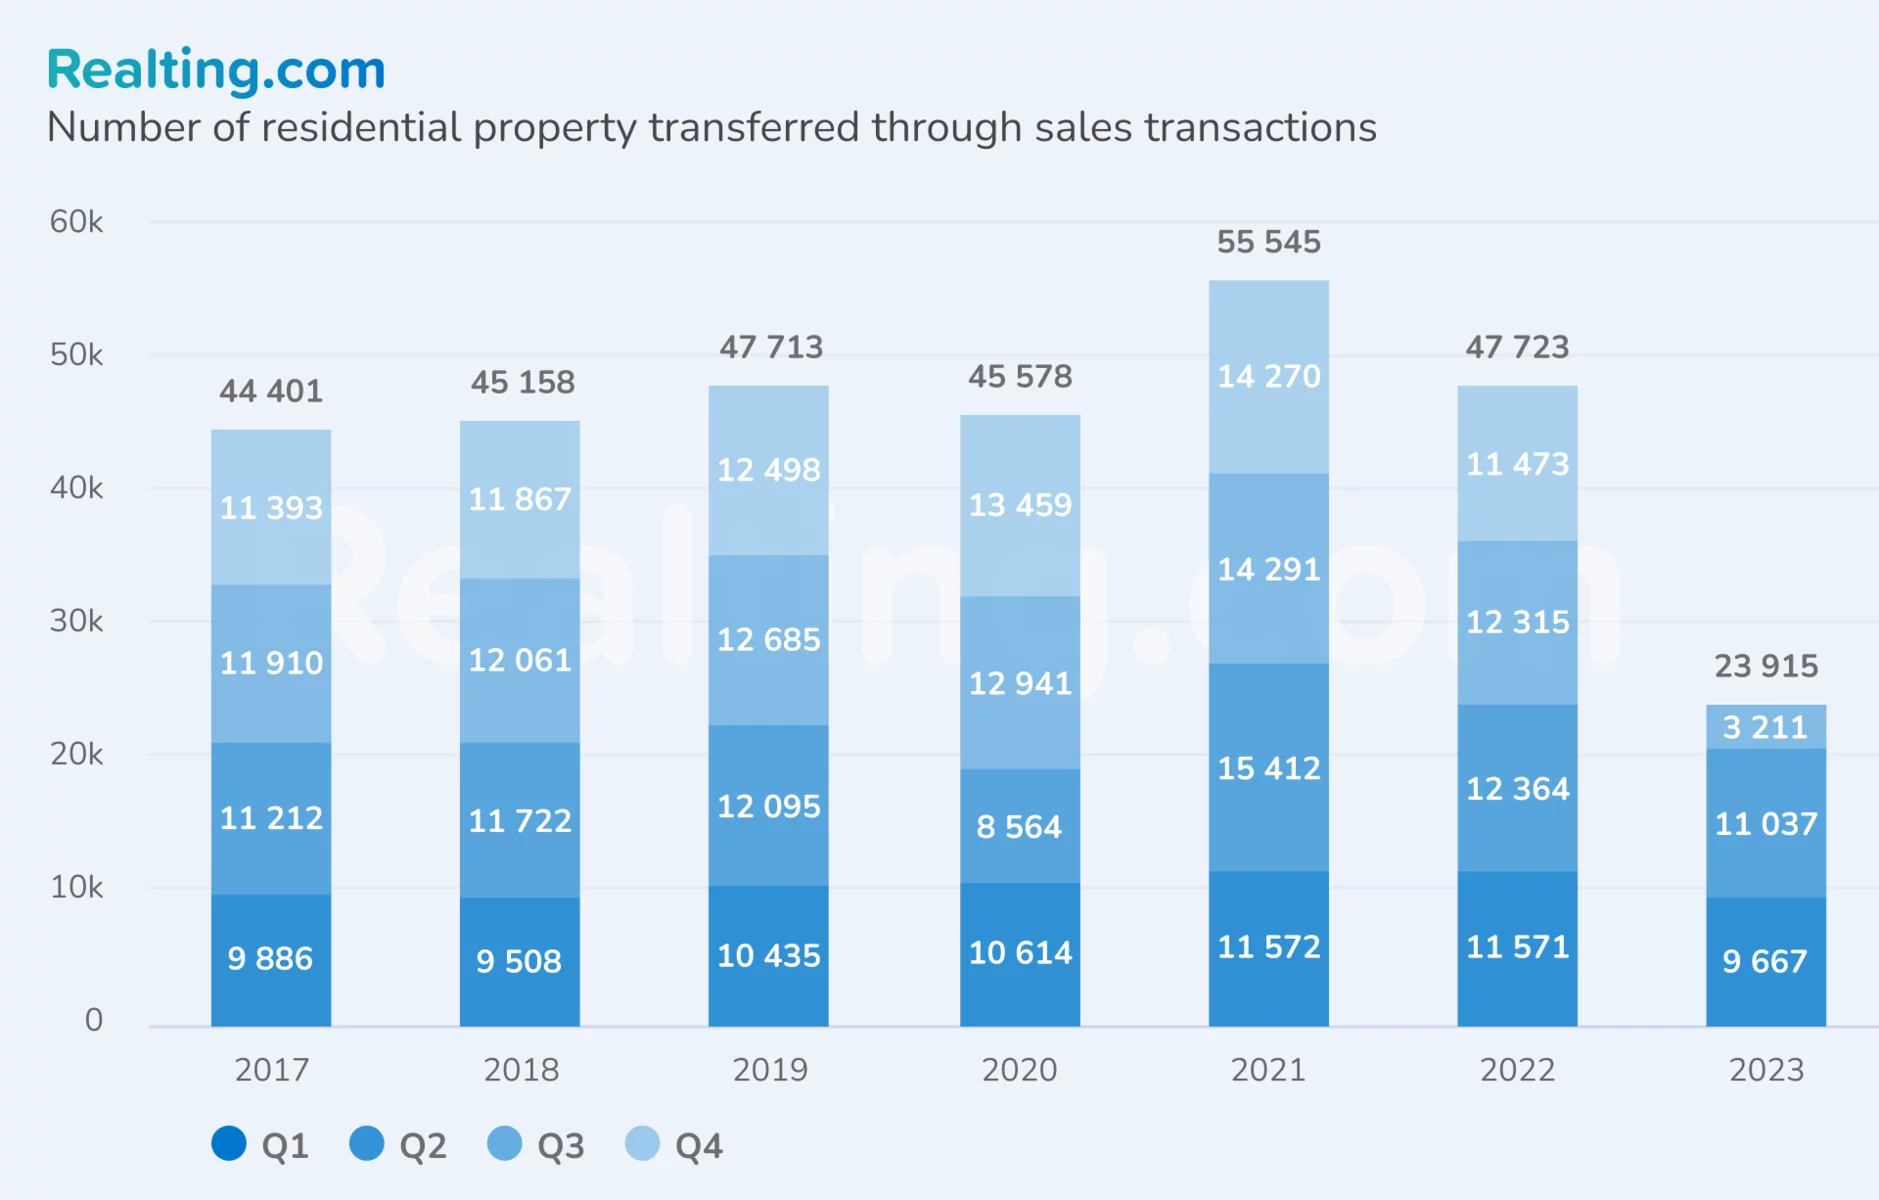 Number of transferred residential real estate objects registered in purchase and sale transactions